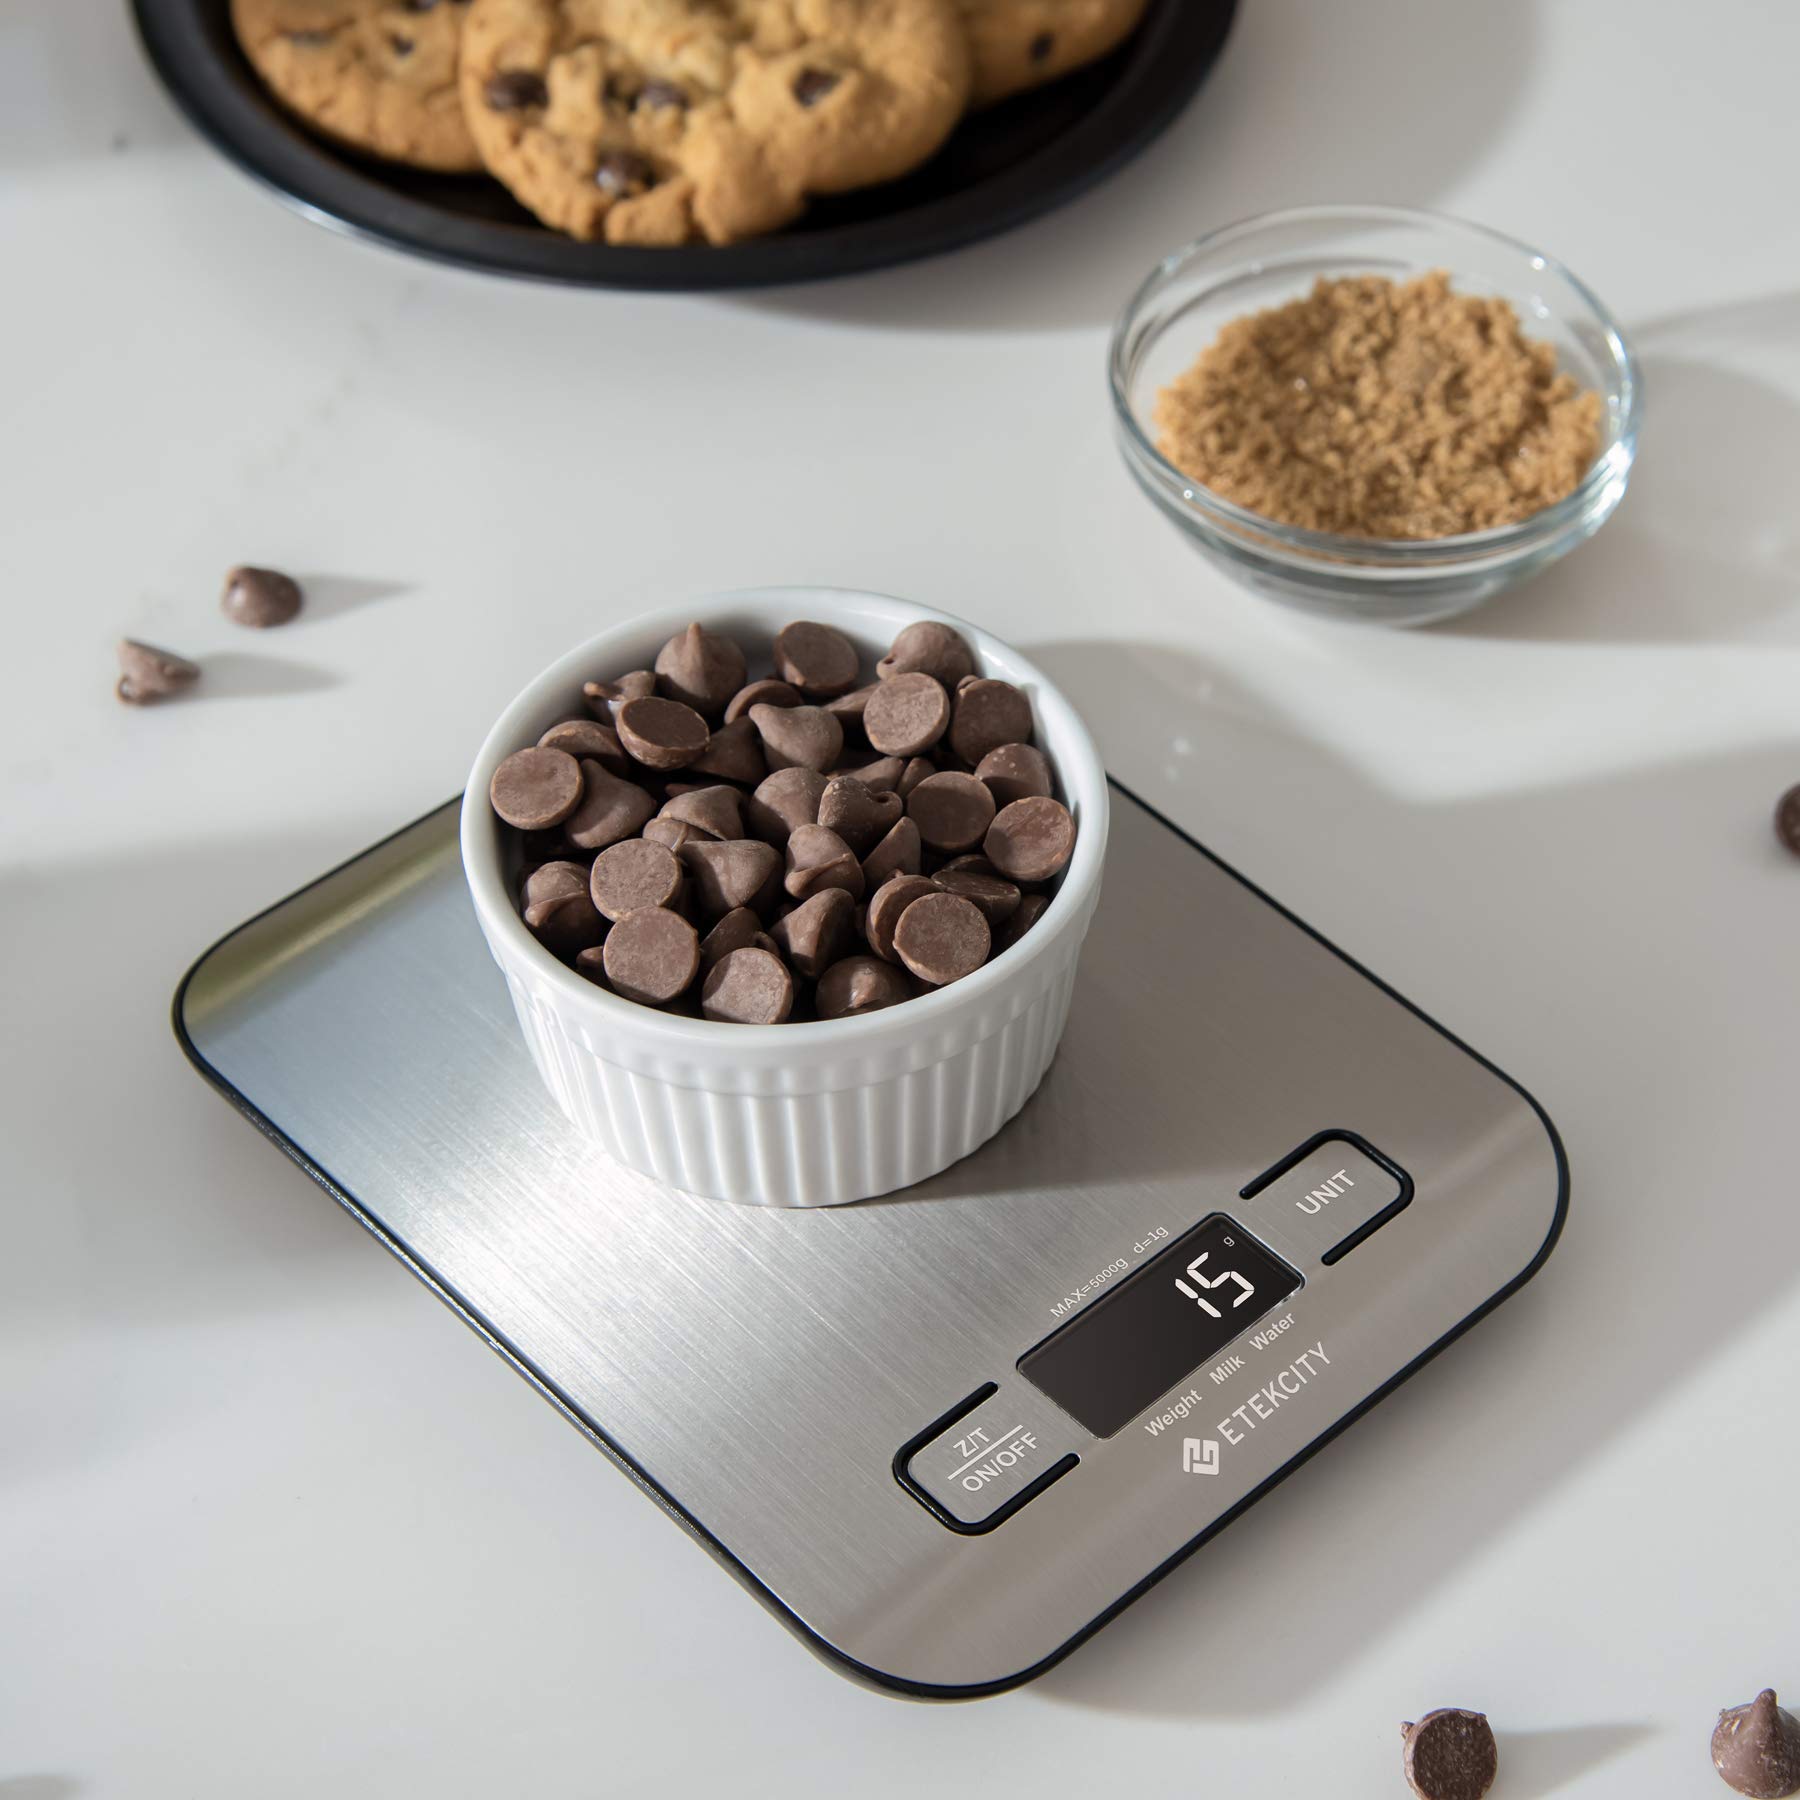 Etekcity Digital Kitchen Scales, Premium Stainless Steel Food Scales, Professional Food Weighing Scales with LCD Display, Incredible Precision up to 1 g (5 kg Maximum Weight), Silver